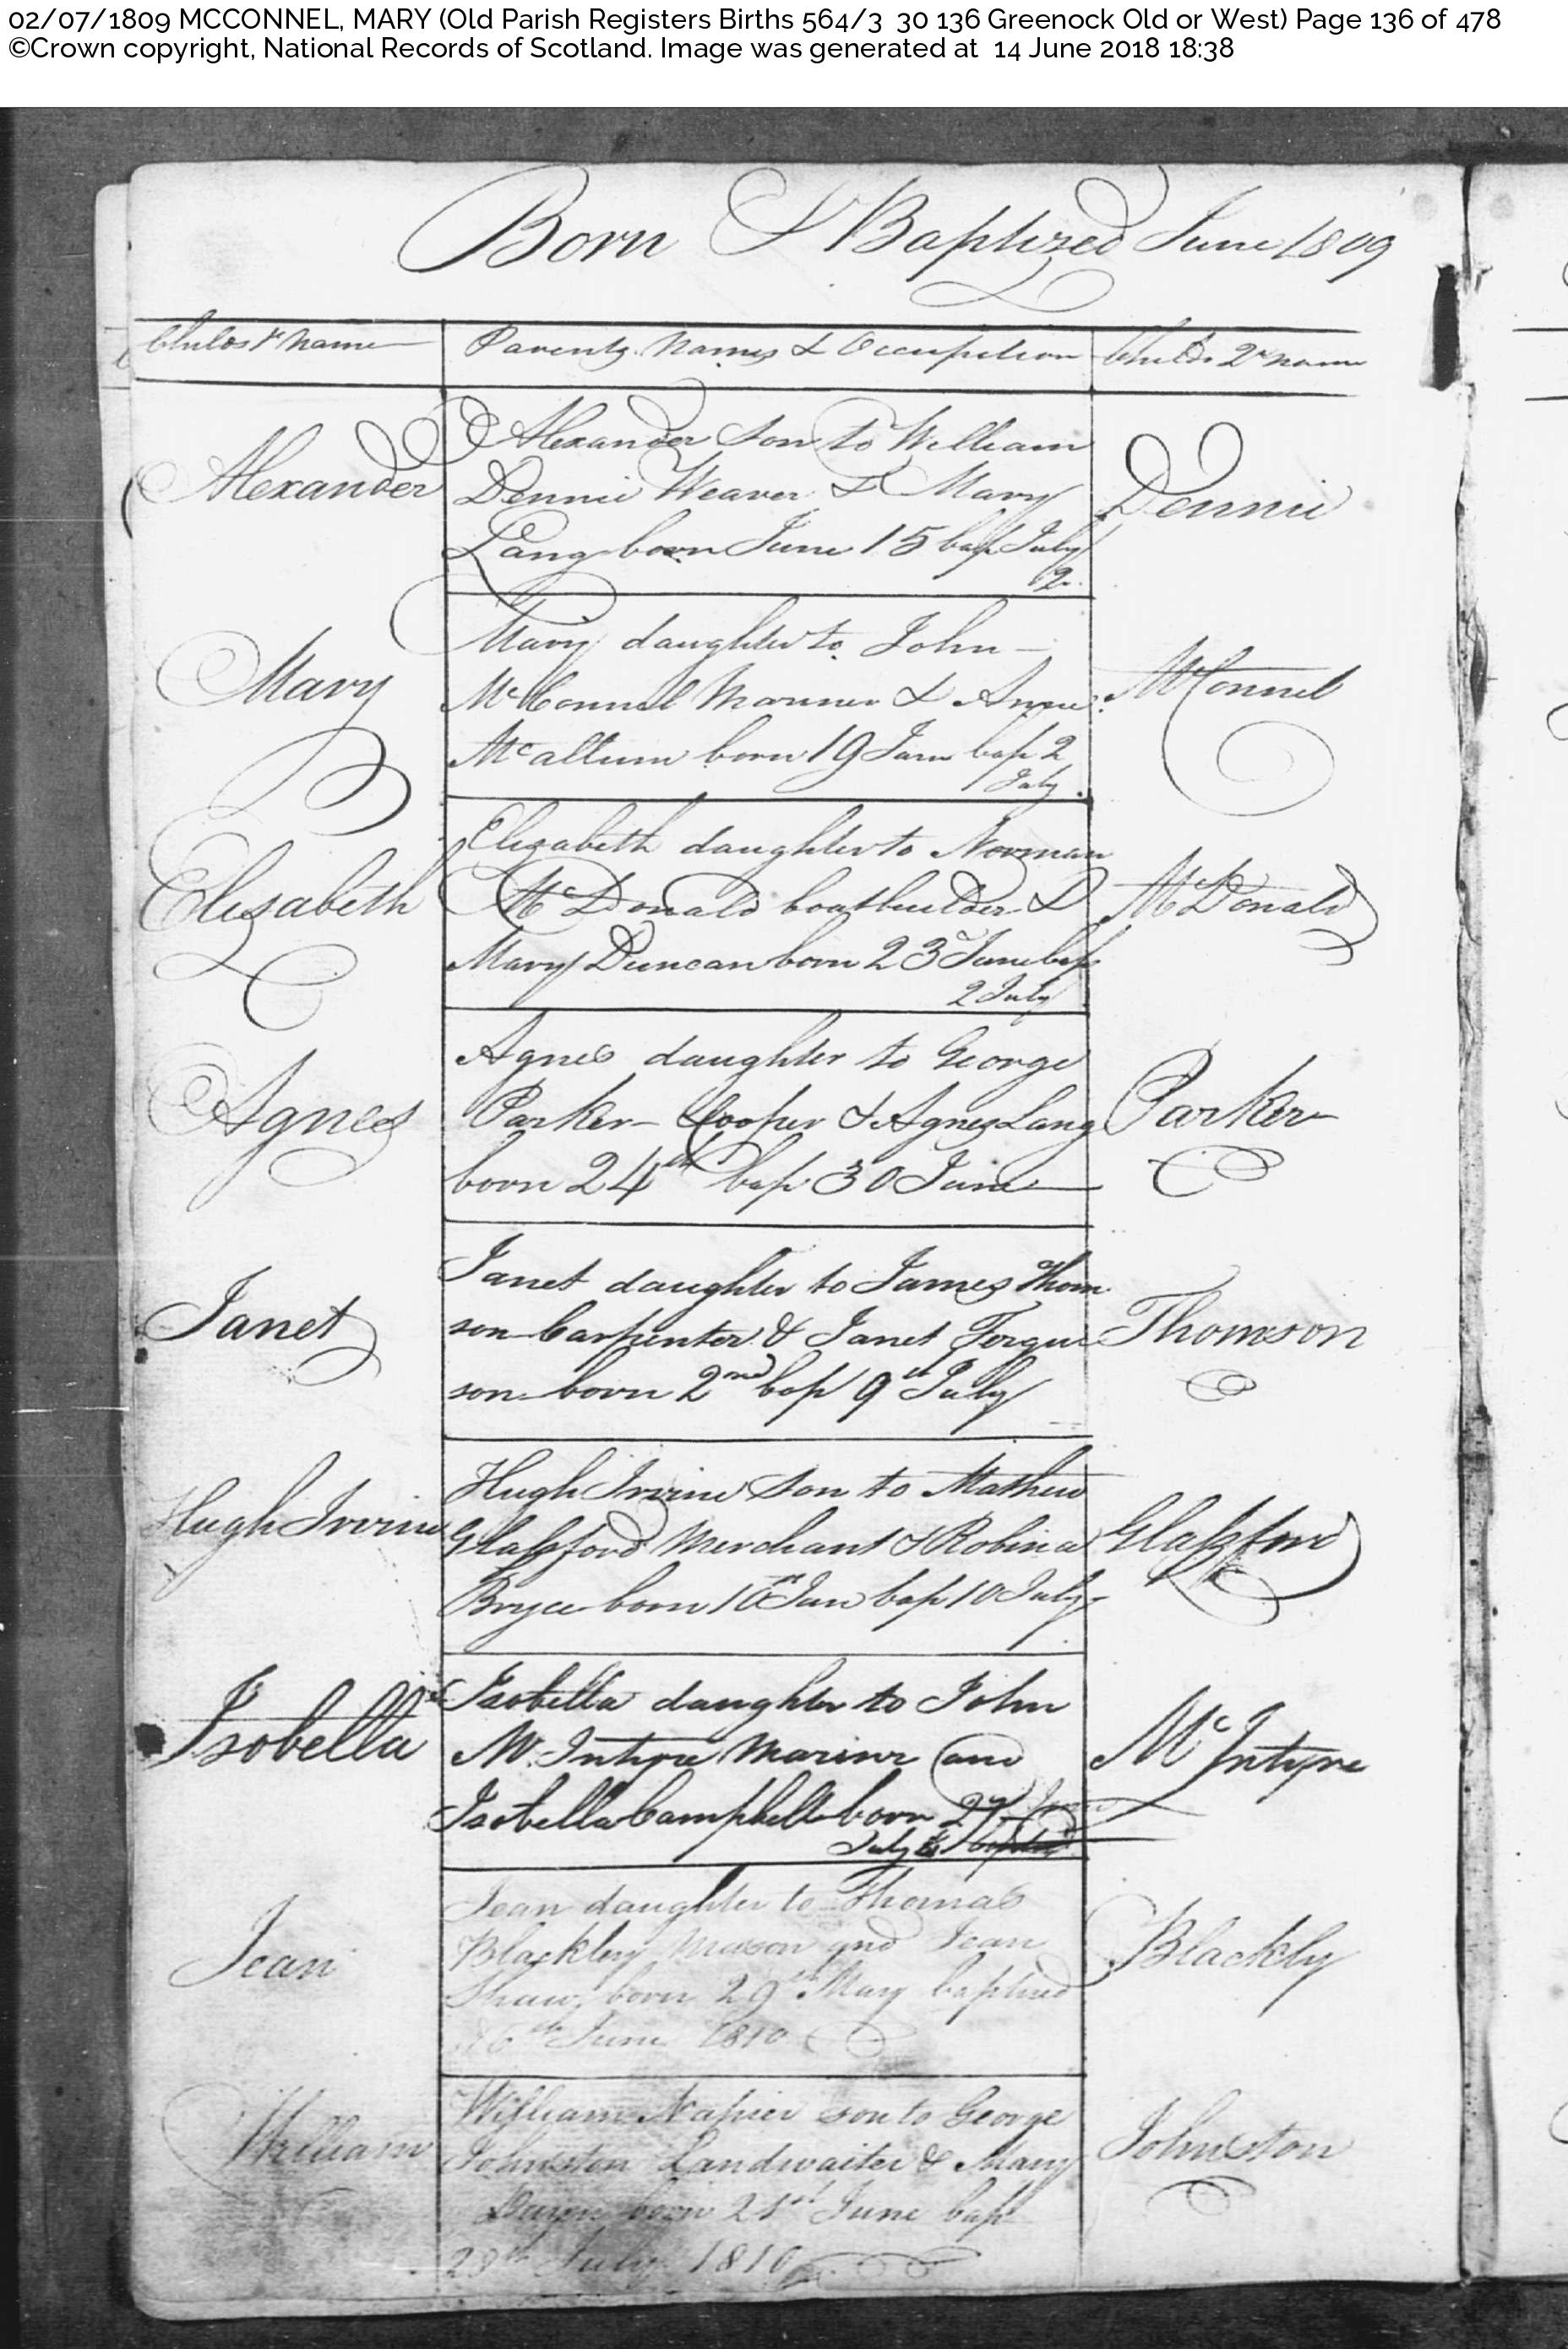 MaryConnell_B1809 Greenock, July 2, 1809, Linked To: <a href='profiles/i2561.html' >Ann McCallum</a> and <a href='profiles/i2558.html' >John Connell 🧬</a>